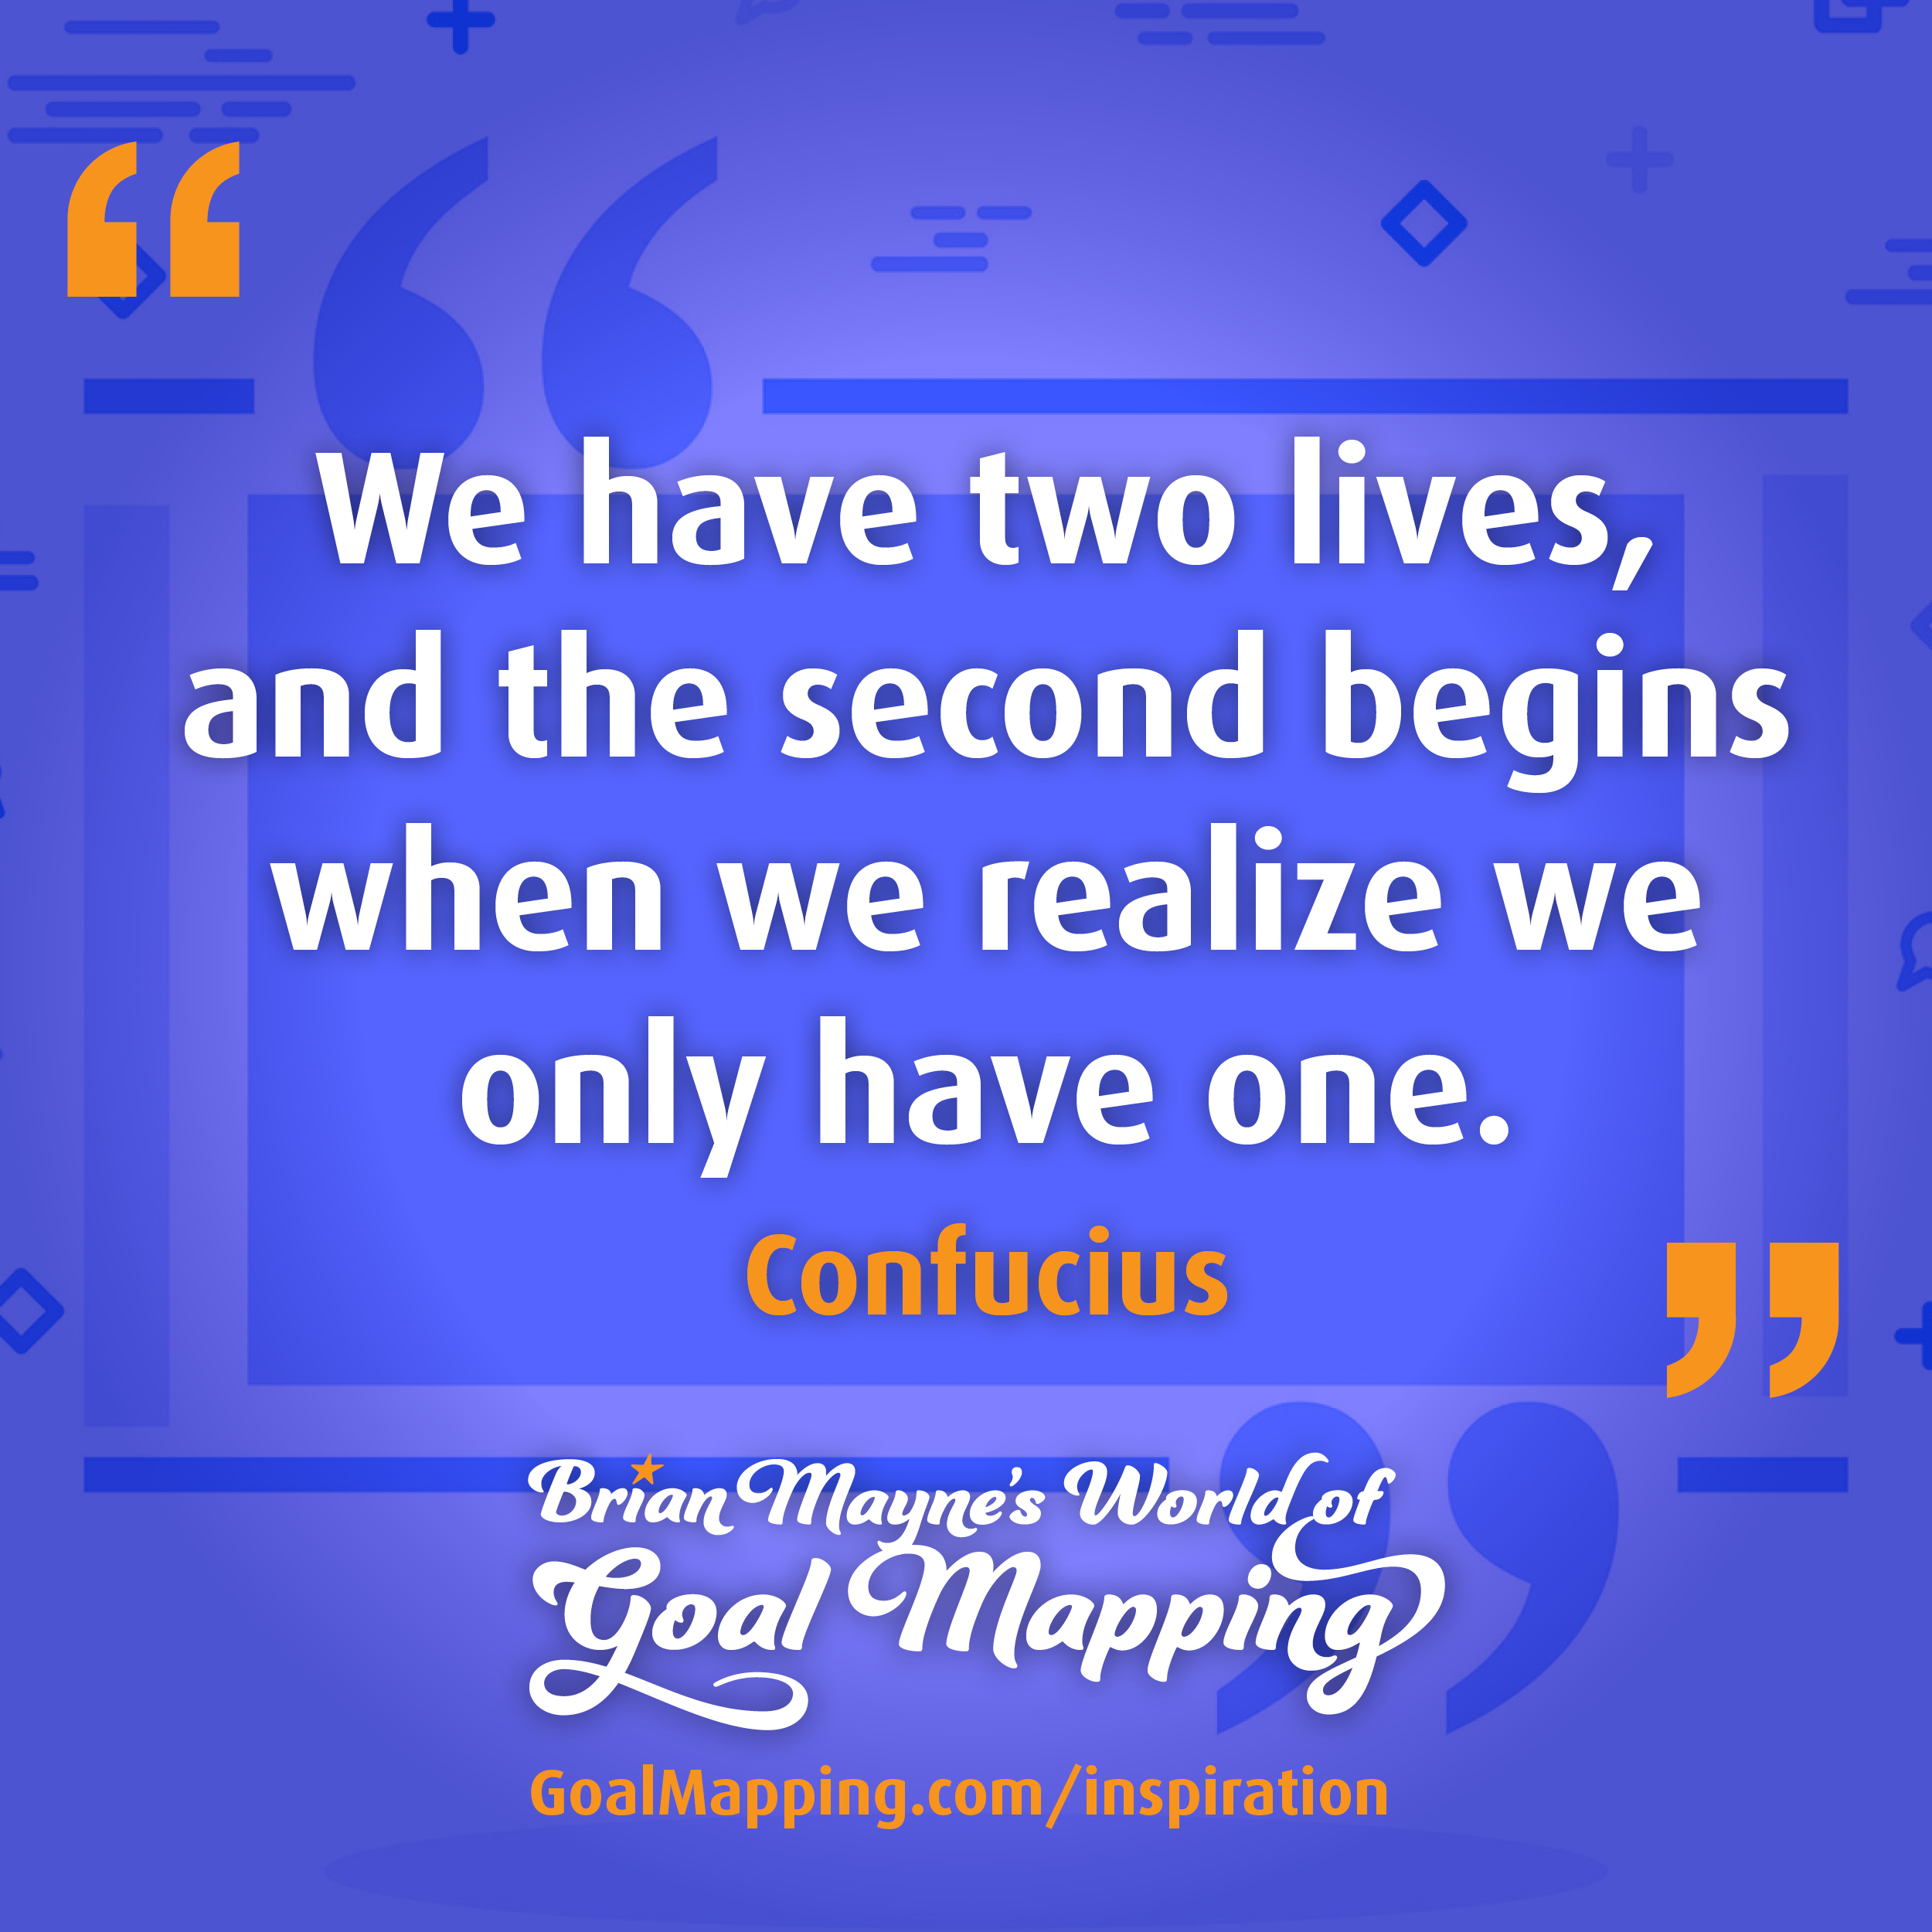 "We have two lives, and the second begins when we realise we only have one." Confucius